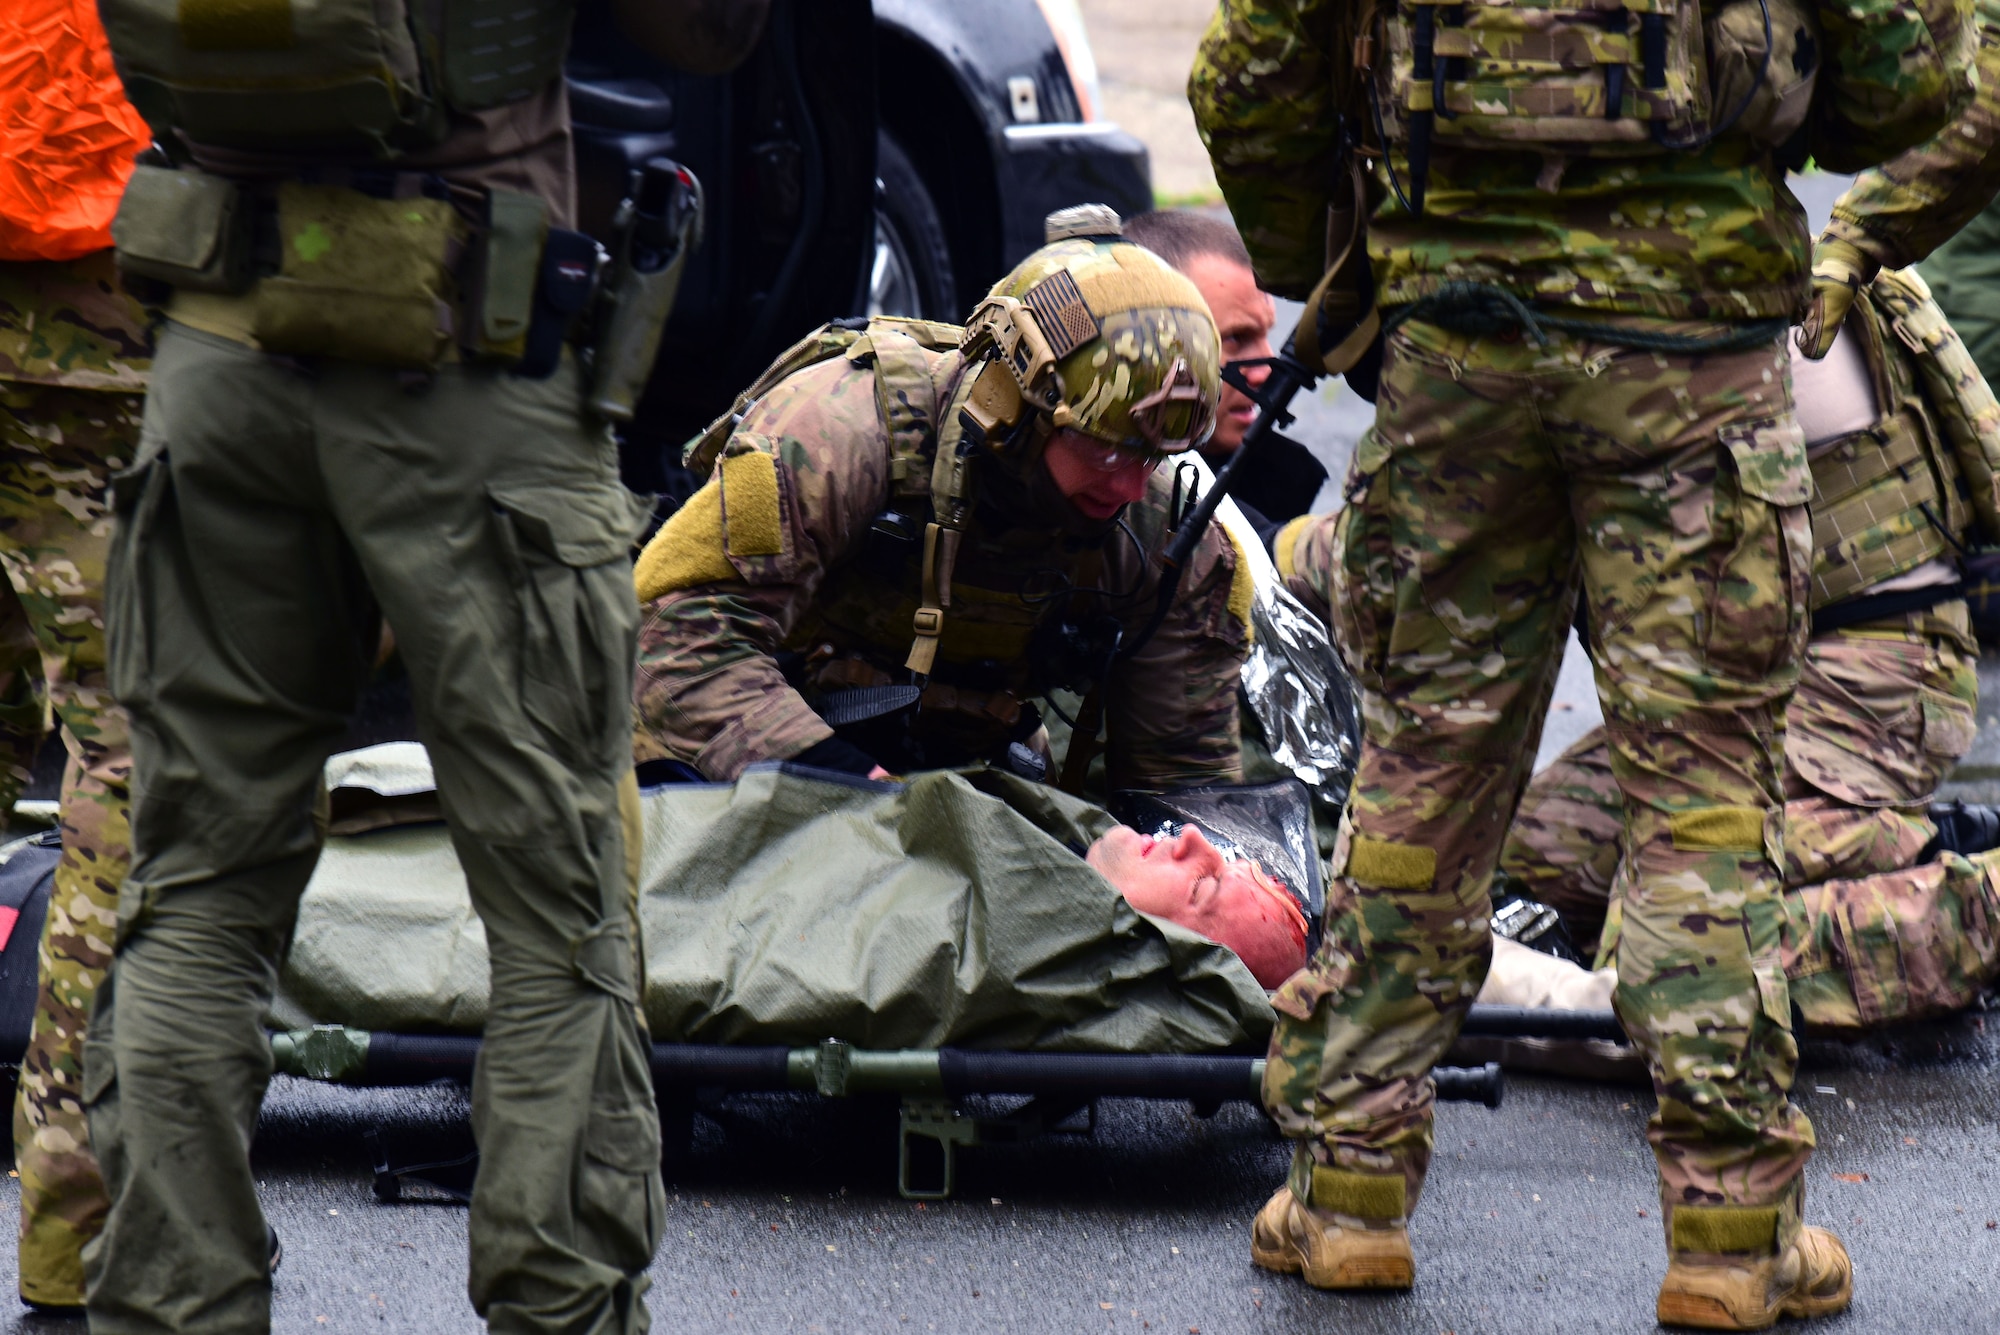 A 57th Rescue Squadron Guardian Angel pararescueman, stationed at Aviano Air Base, Italy, stabilizes a simulated causality during a Non-combatant Evacuation Operation exercise at the Police Academy, Croatia, March 18, 2019. The 31st Fighter Wing and the 352nd Special Operations Wing, RAF Mildenhall, England, partnered with the government of Croatia and the U.S. Embassy Zagreb to test their abilities to plan and execute emergency response during a crisis.  (U.S. Air Force photo by Senior Airman Kevin Sommer Giron)